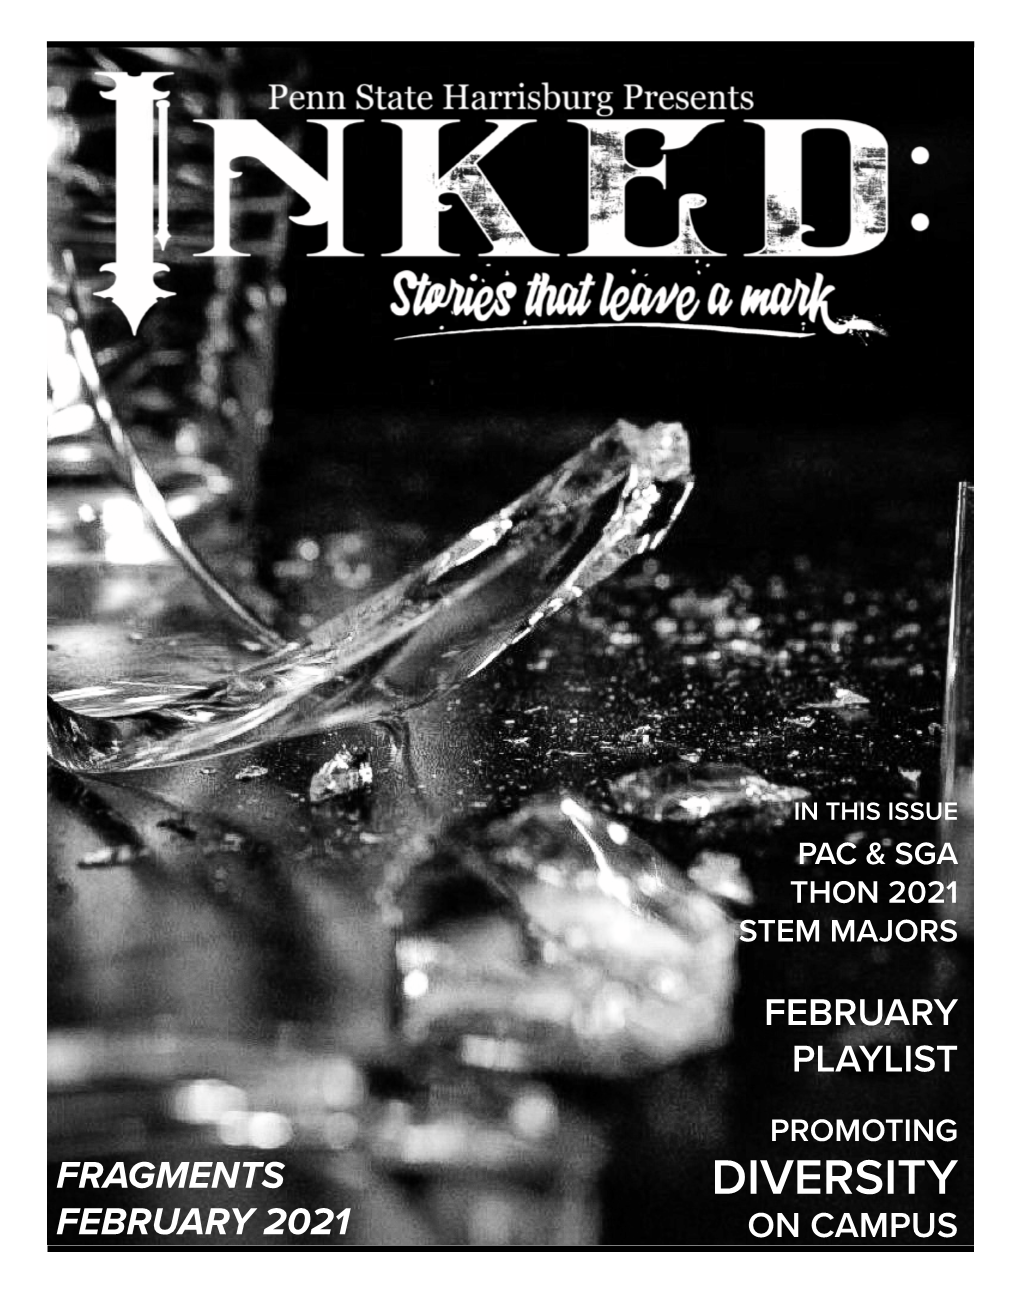 INKED Issue 6 Feb 2021- Fragments